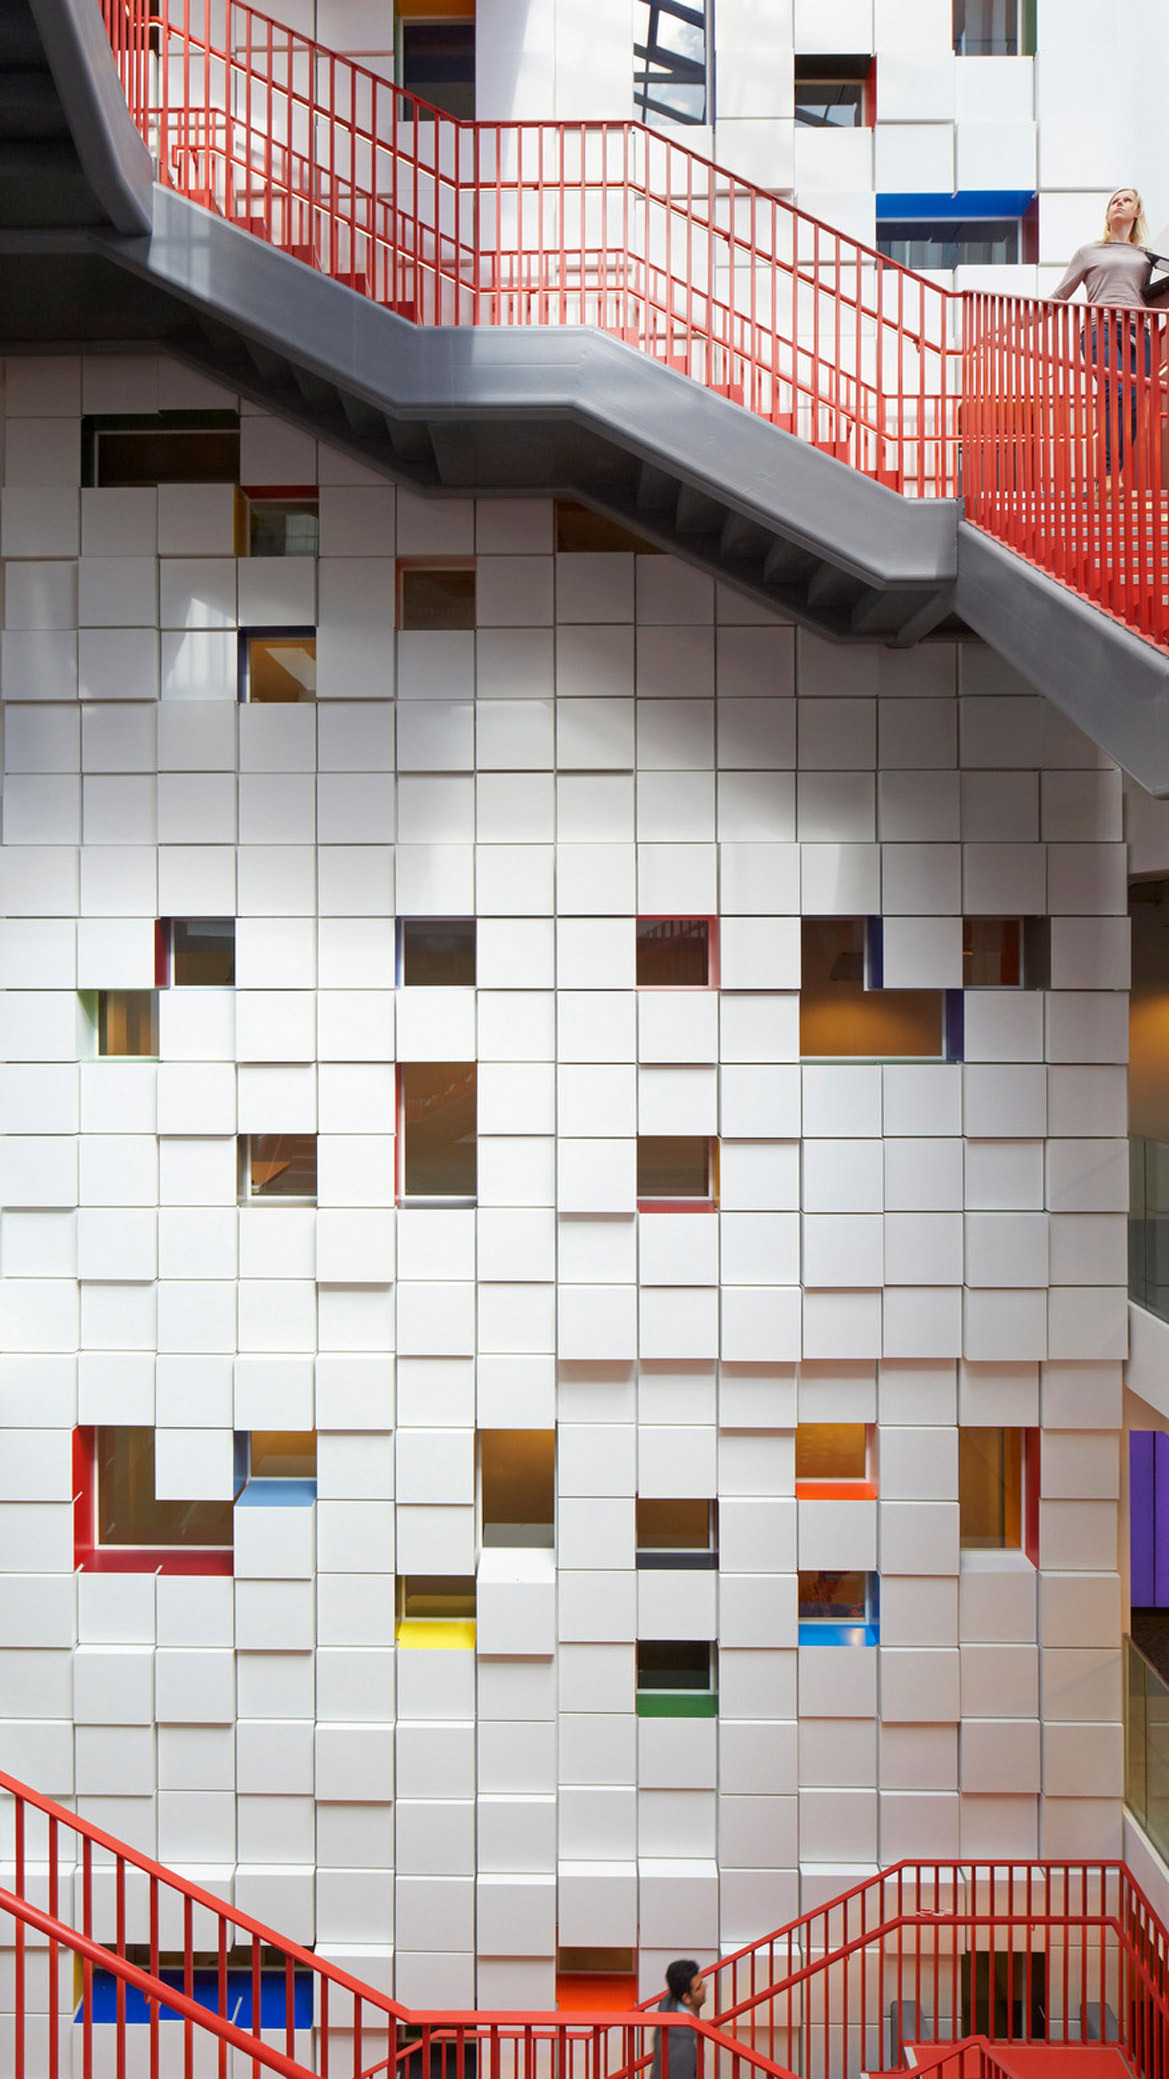 Modern interior featuring a stark white tiled wall with scattered colored transparent panels, complemented by a bold red-hued staircase providing a striking visual contrast.